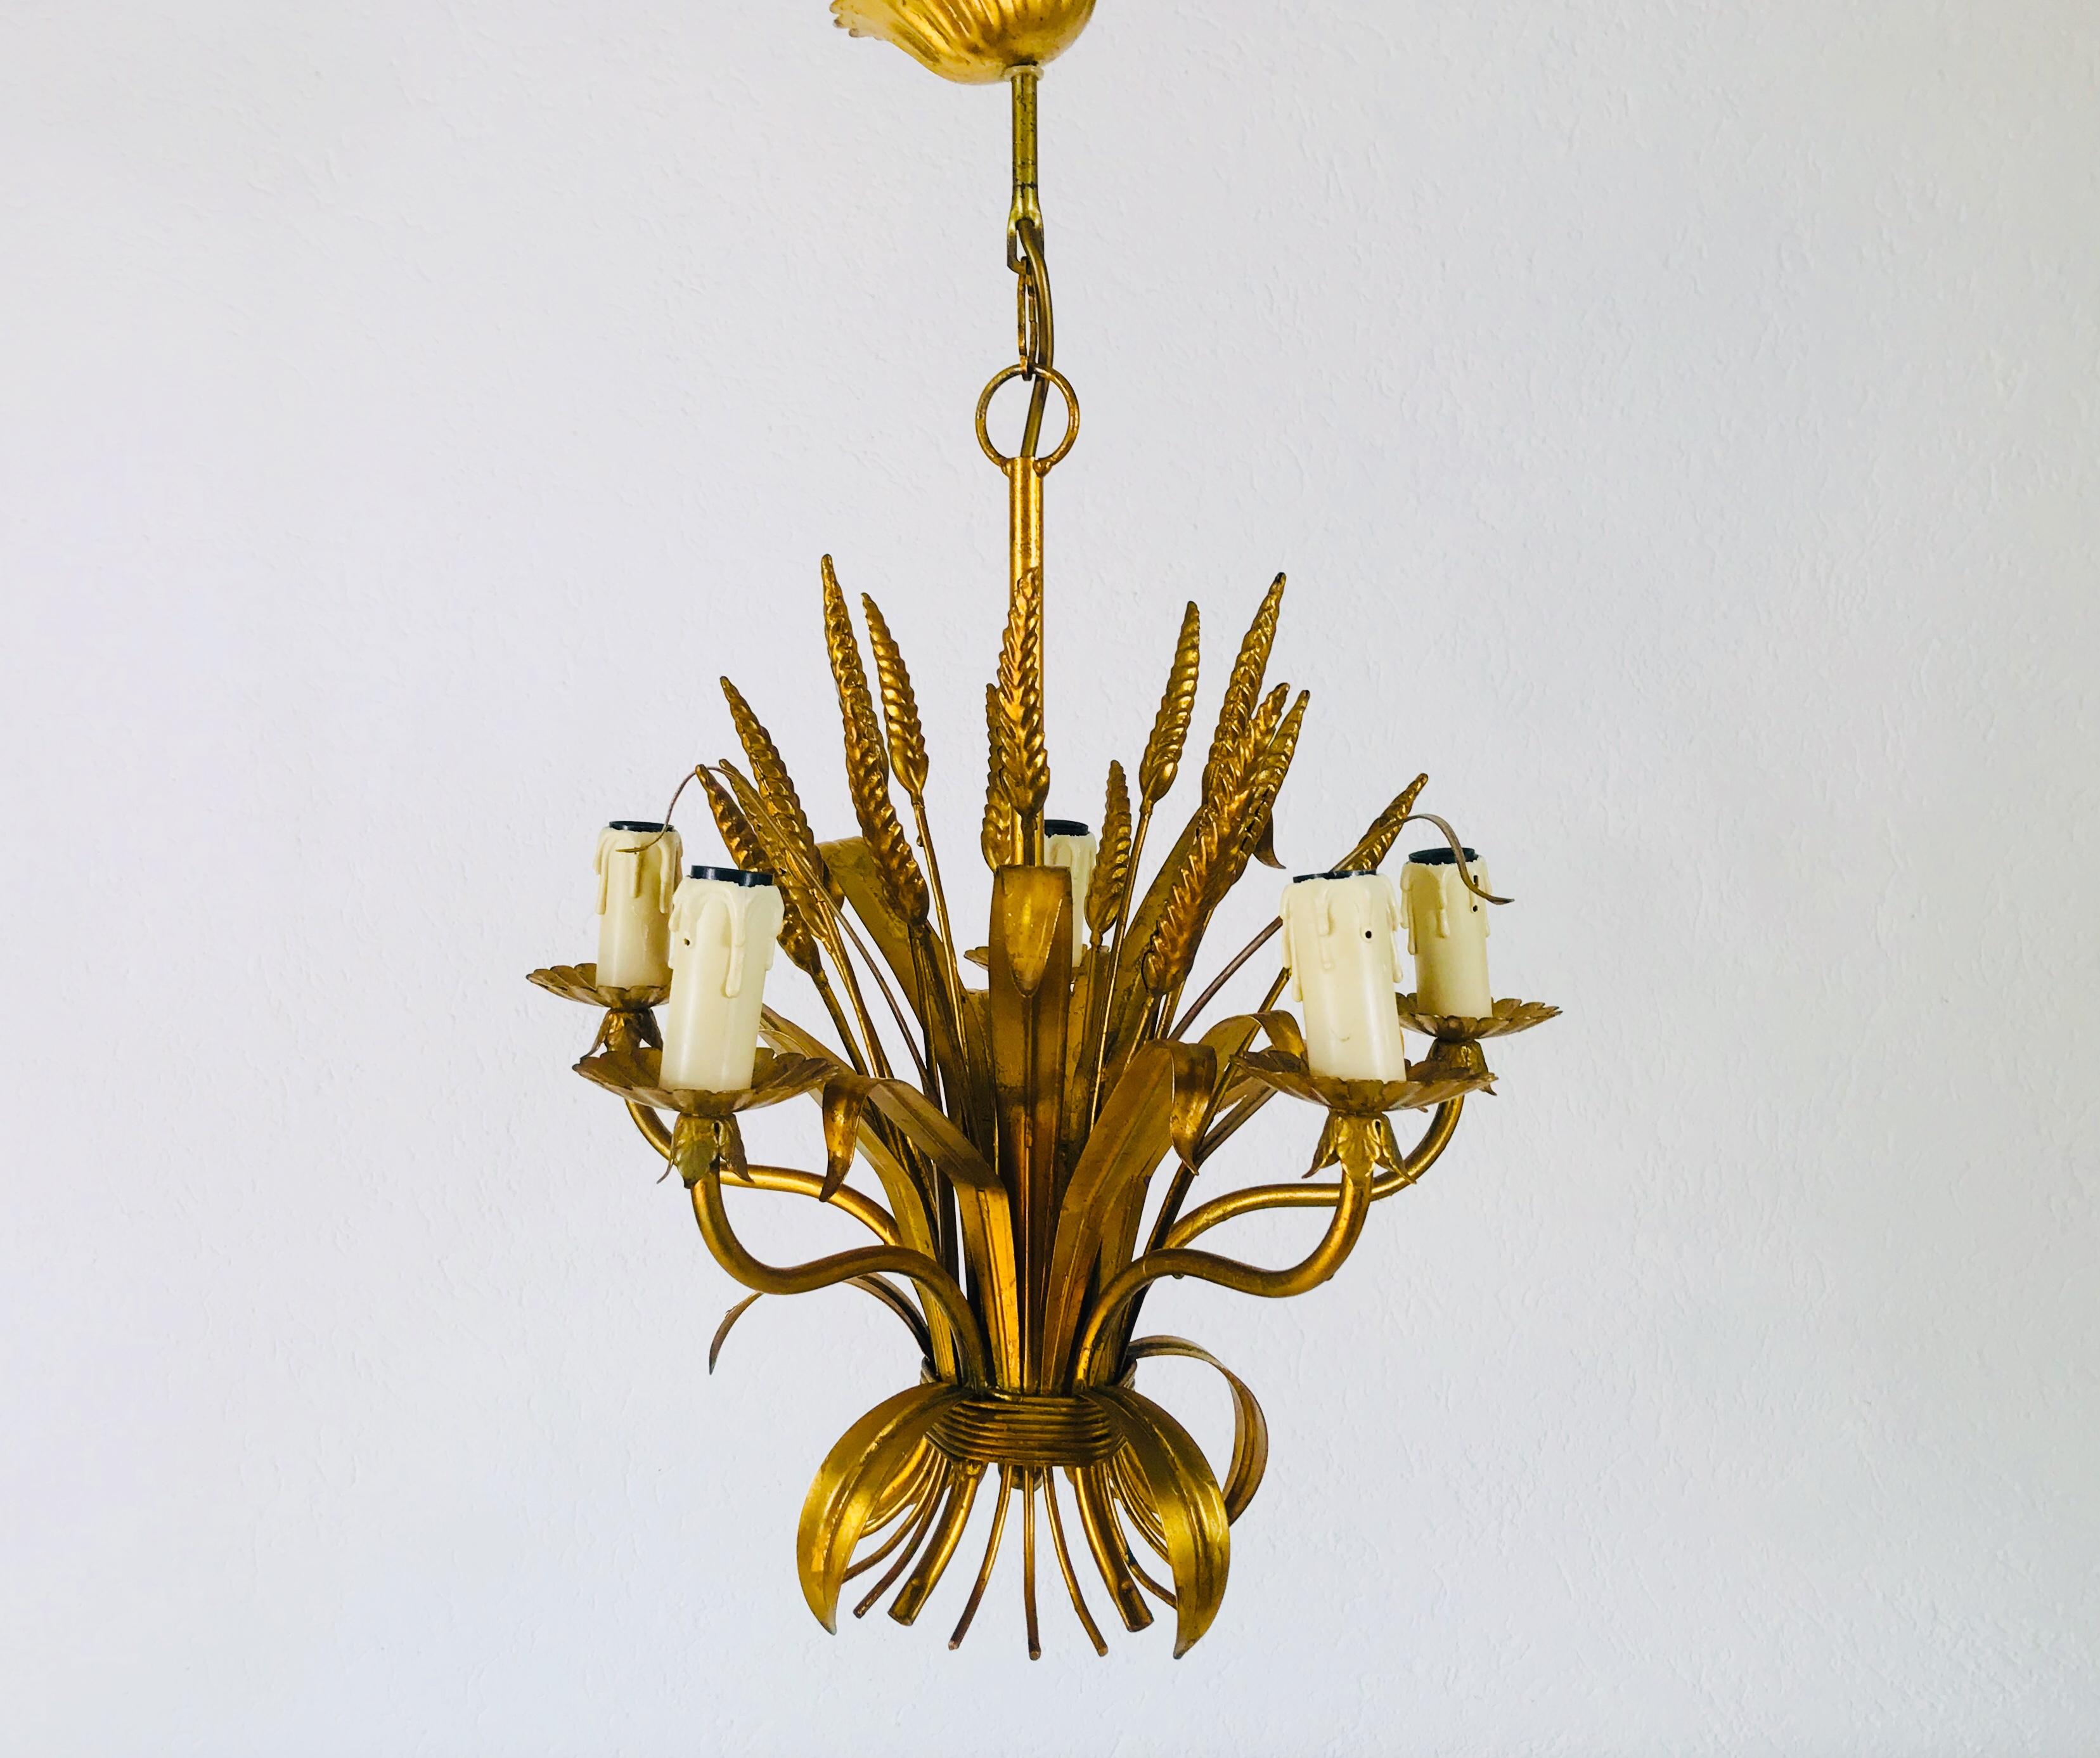 An extraordinary pendant lamp by the German designer Hans Kögl made in Germany in the 1970s. The lamp has a beautiful wheat sheaf design. It is made in the period of Hollywood Regency.

The light requires five E14 light bulbs.